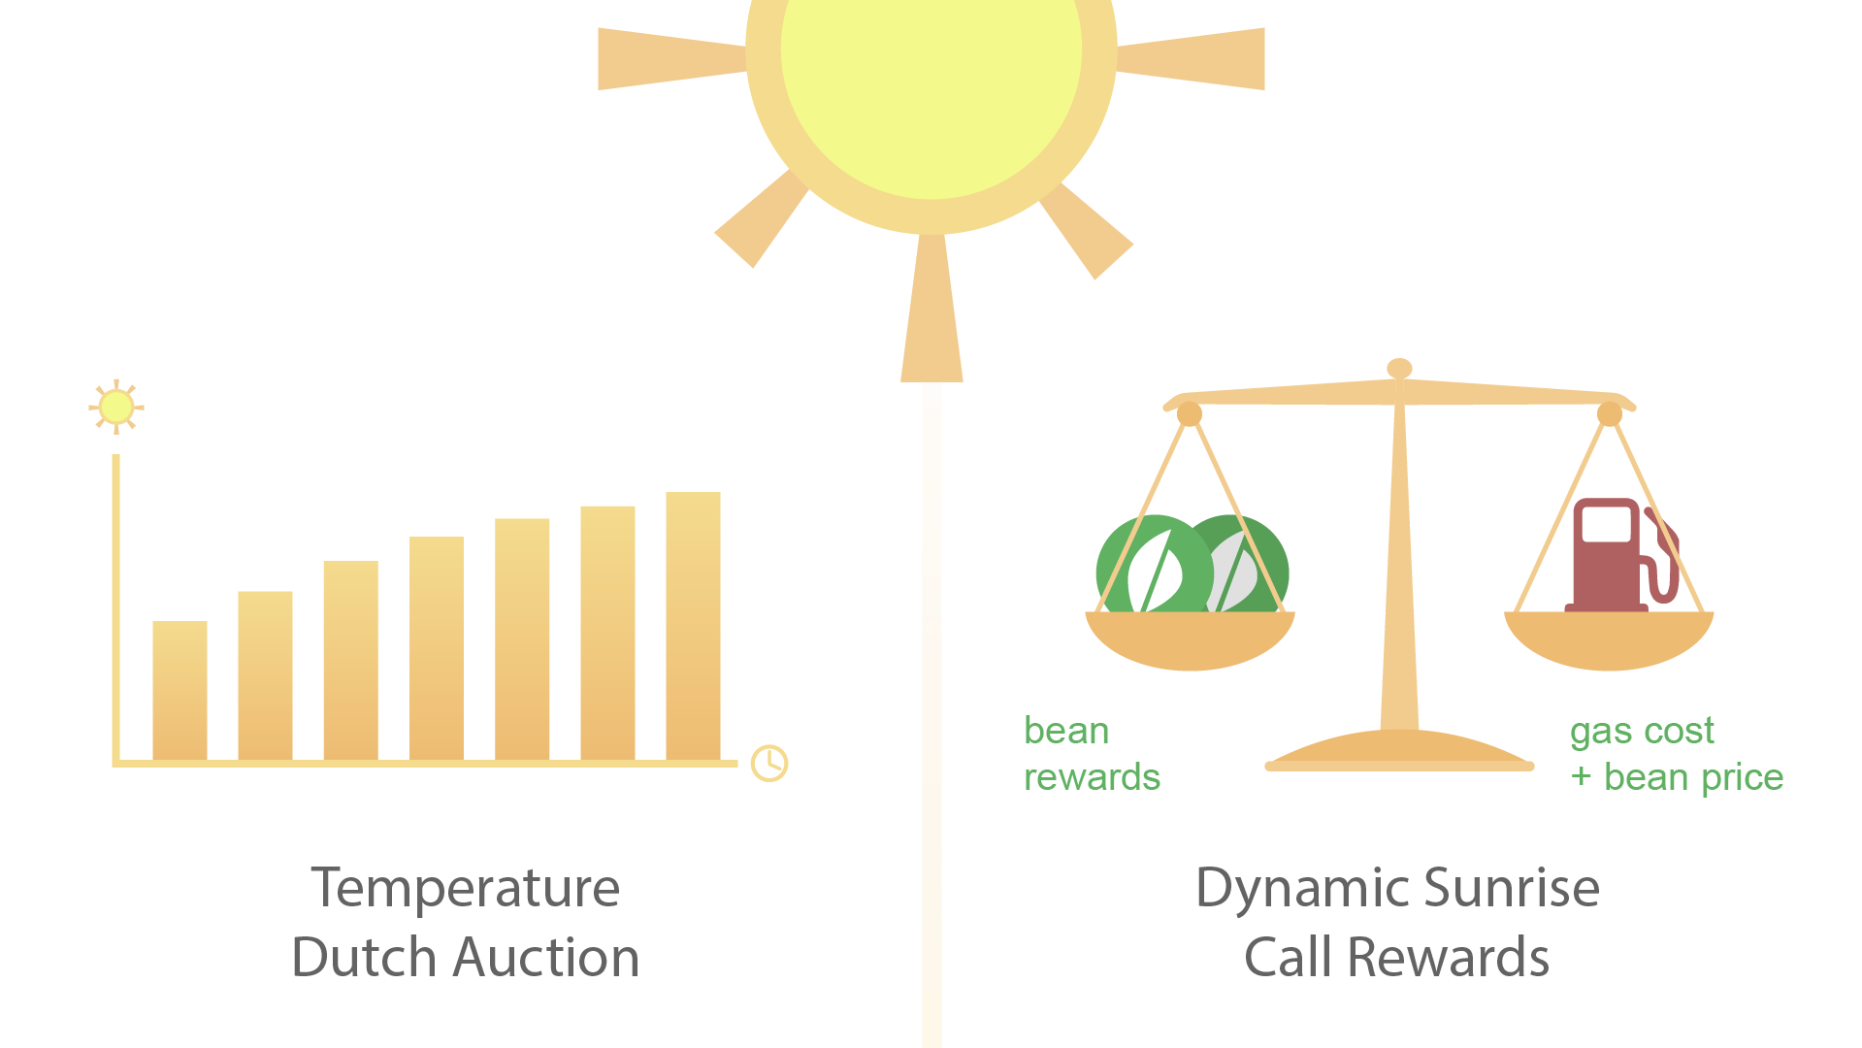 Sunrise Improvements consist of 2 changes; The addition of a Dutch auction for the Temperature of a given Season, and dynamic rewards for calling the Sunrise function